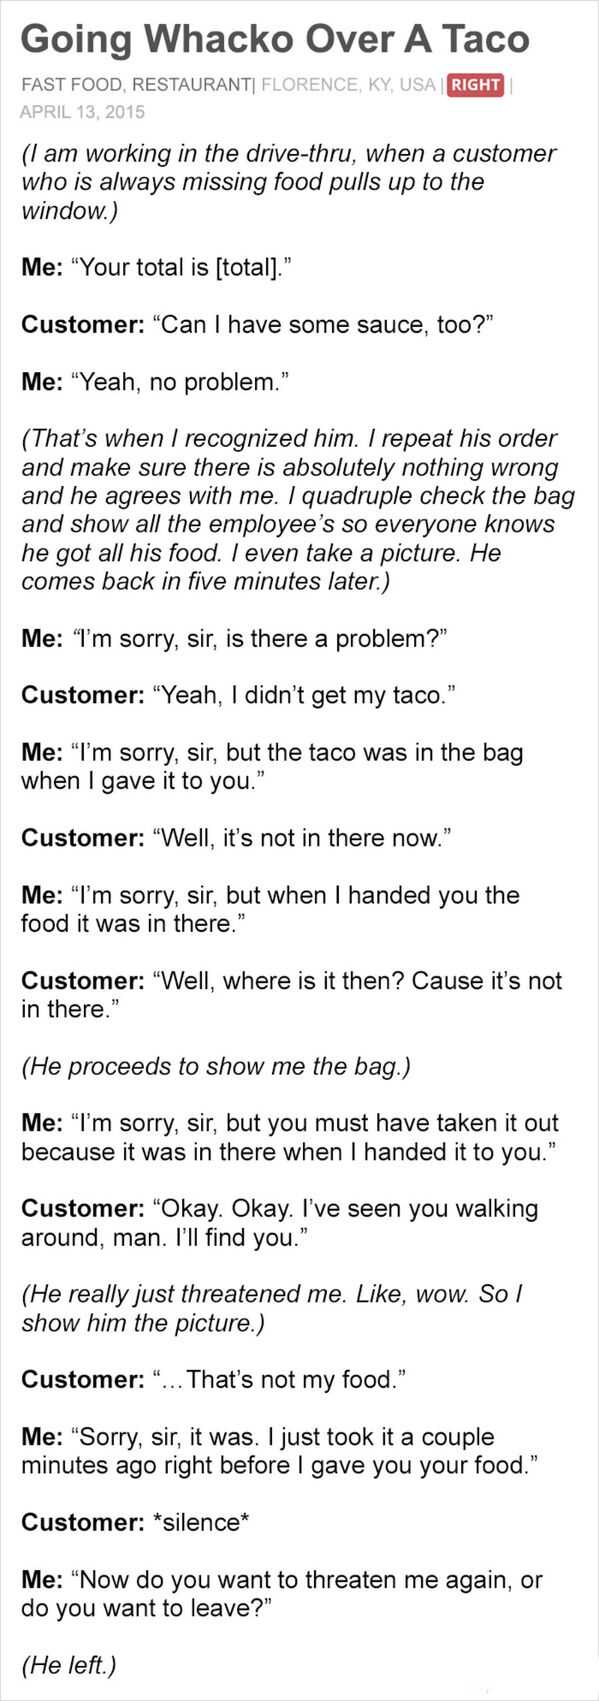 document - Going Whacko Over A Taco Fast Food Restaurant Florence, Ky, Usa Right I am working in the drivethru, when a customer who is always missing food pulls up to the window. Me "Your total is total. Customer "Can I have some sauce, too?" Me "Yeah, no